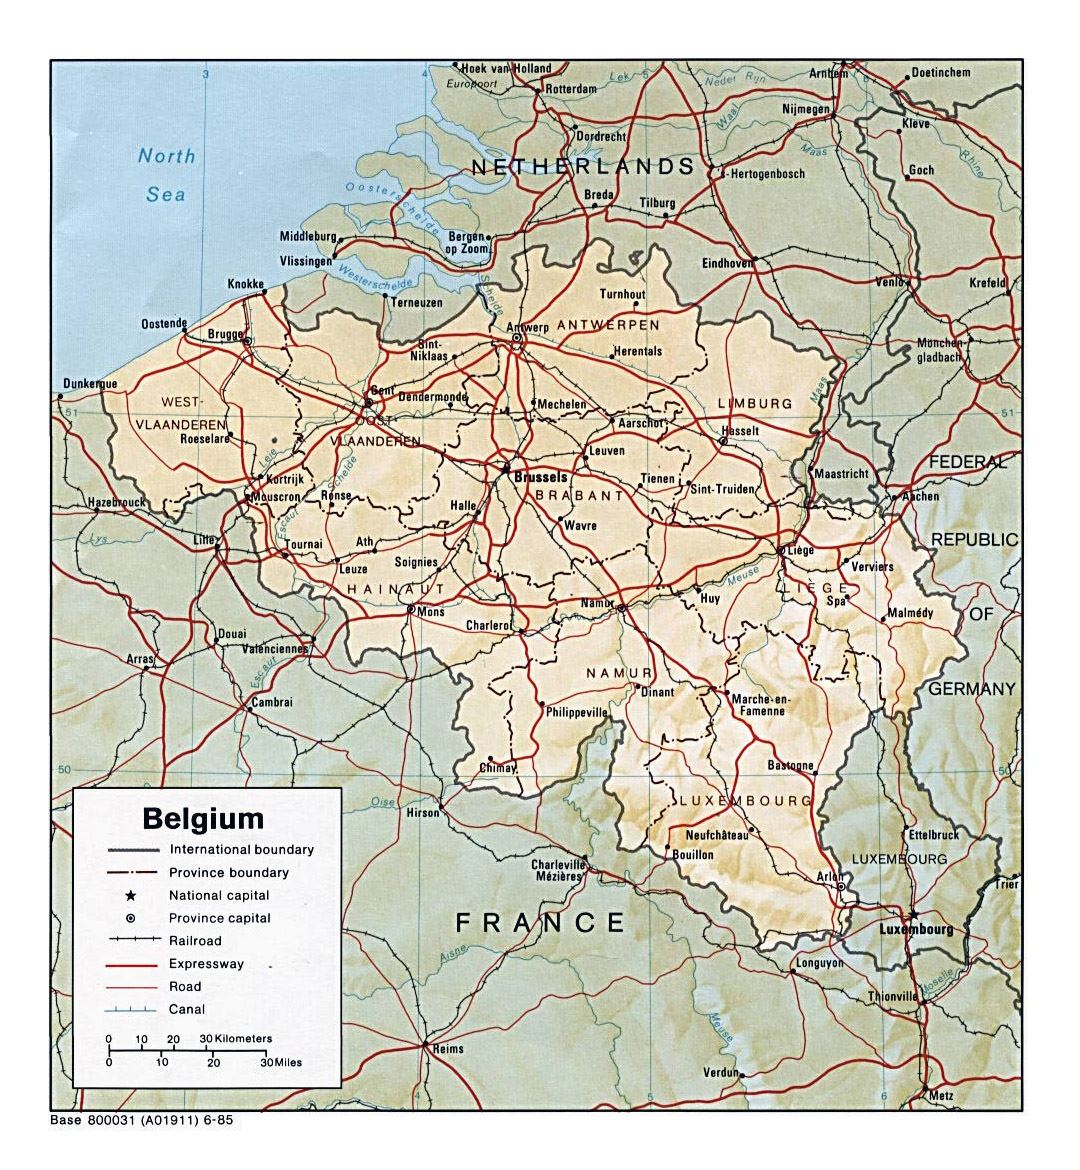 Detailed political and administrative map of Belgium with relief, roads and major cities - 1985